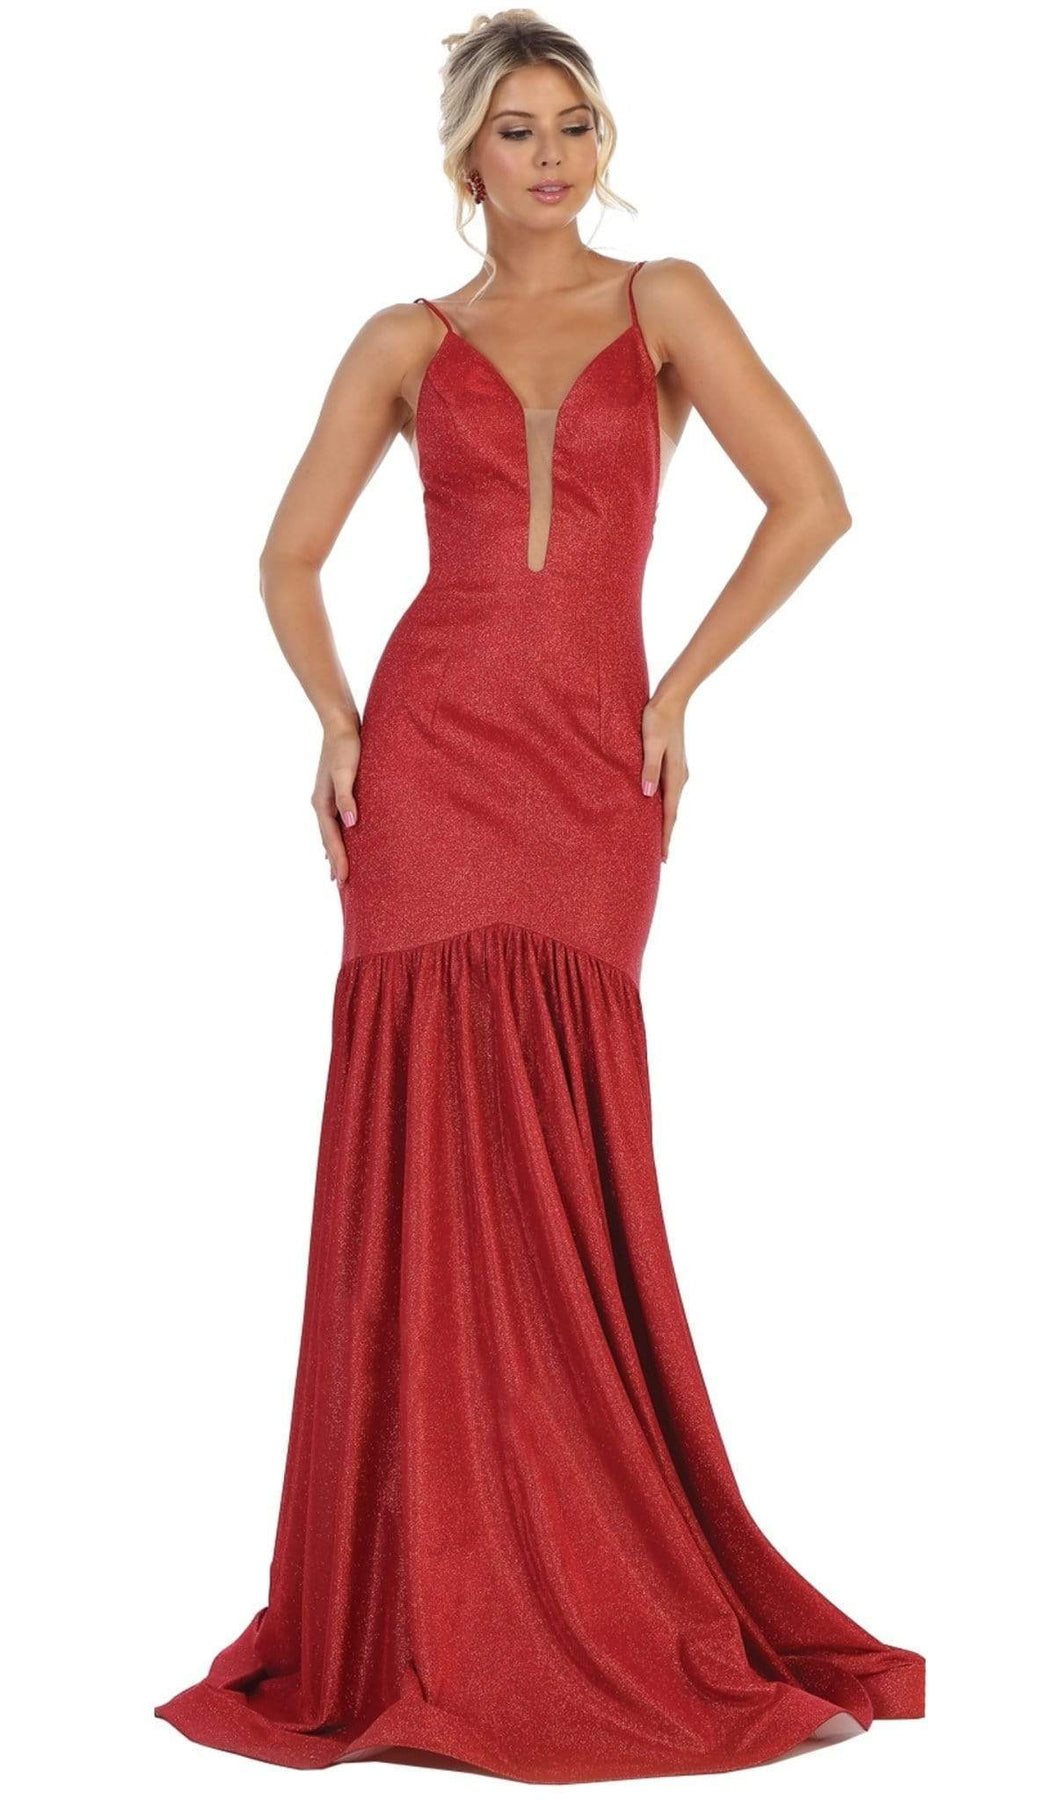 May Queen - RQ7725 Plunging V-Neck Fitted Trumpet Gown Special Occasion Dress 4 / Red/Multi